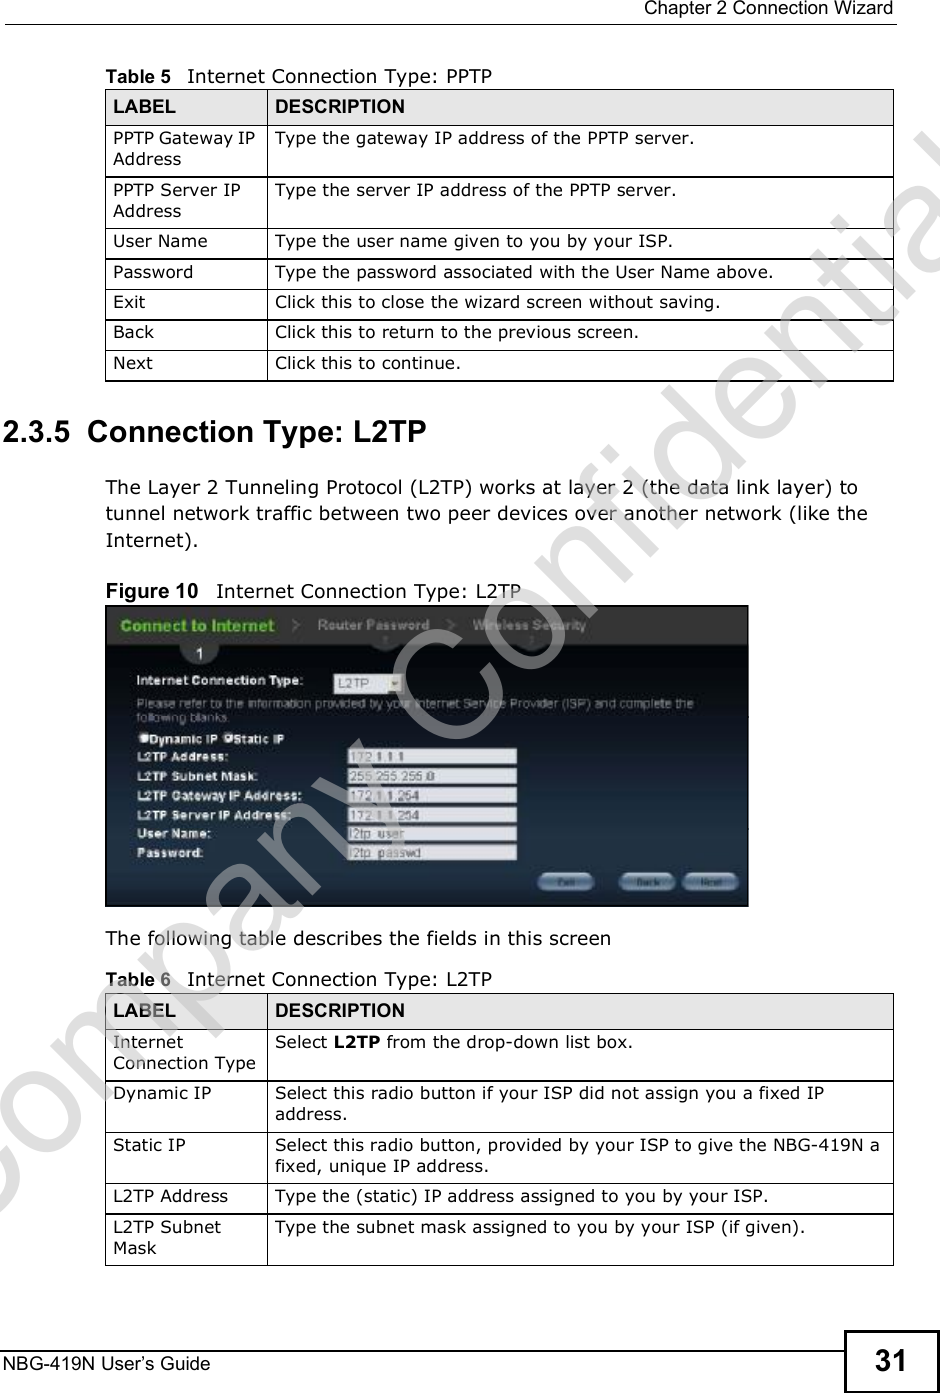  Chapter 2Connection WizardNBG-419N User s Guide 312.3.5  Connection Type: L2TPThe Layer 2 Tunneling Protocol (L2TP) works at layer 2 (the data link layer) to tunnel network traffic between two peer devices over another network (like the Internet).Figure 10   Internet Connection Type: L2TP The following table describes the fields in this screenPPTP Gateway IP AddressType the gateway IP address of the PPTP server.PPTP Server IP AddressType the server IP address of the PPTP server.User Name Type the user name given to you by your ISP. Password Type the password associated with the User Name above.Exit Click this to close the wizard screen without saving.Back Click this to return to the previous screen.Next Click this to continue. Table 5   Internet Connection Type: PPTPLABEL DESCRIPTIONTable 6   Internet Connection Type: L2TPLABEL DESCRIPTIONInternet Connection TypeSelect L2TP from the drop-down list box. Dynamic IP Select this radio button if your ISP did not assign you a fixed IP address.Static IP Select this radio button, provided by your ISP to give the NBG-419N a fixed, unique IP address.L2TP Address Type the (static) IP address assigned to you by your ISP.L2TP Subnet MaskType the subnet mask assigned to you by your ISP (if given).Company Confidential